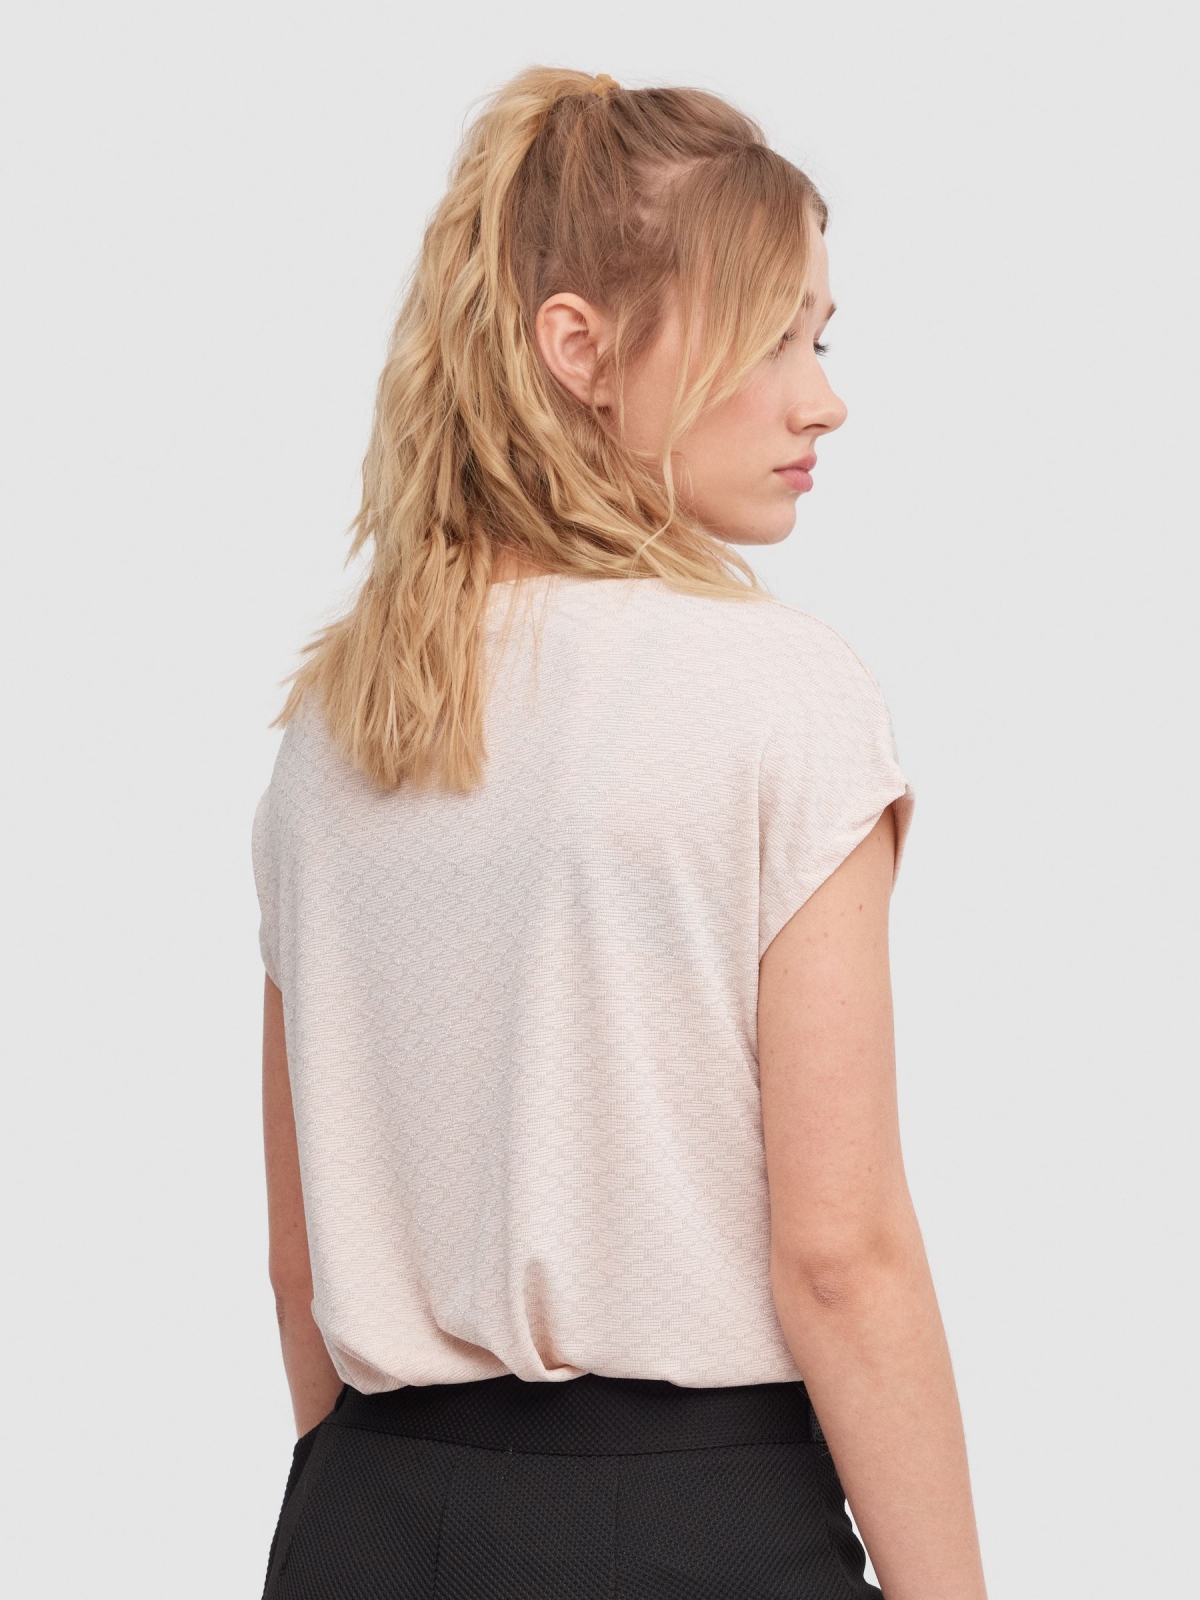 Textured T-shirt powdered pink middle back view